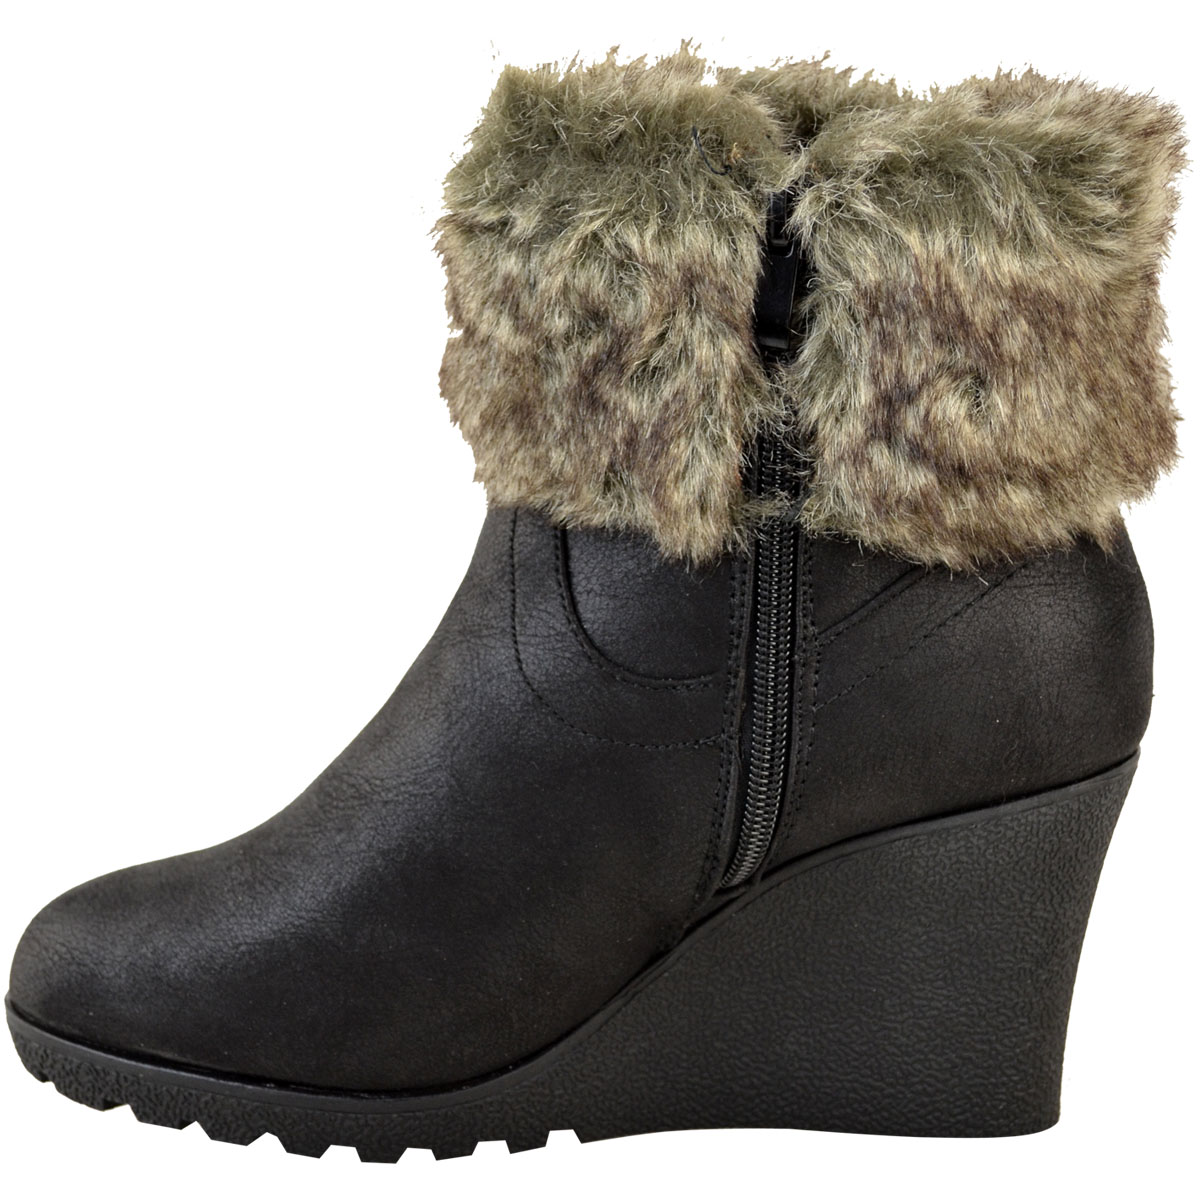 Womens Ladies Winter Fur Wedge Platform Ankle Boots Zip Fluffy Lined ...